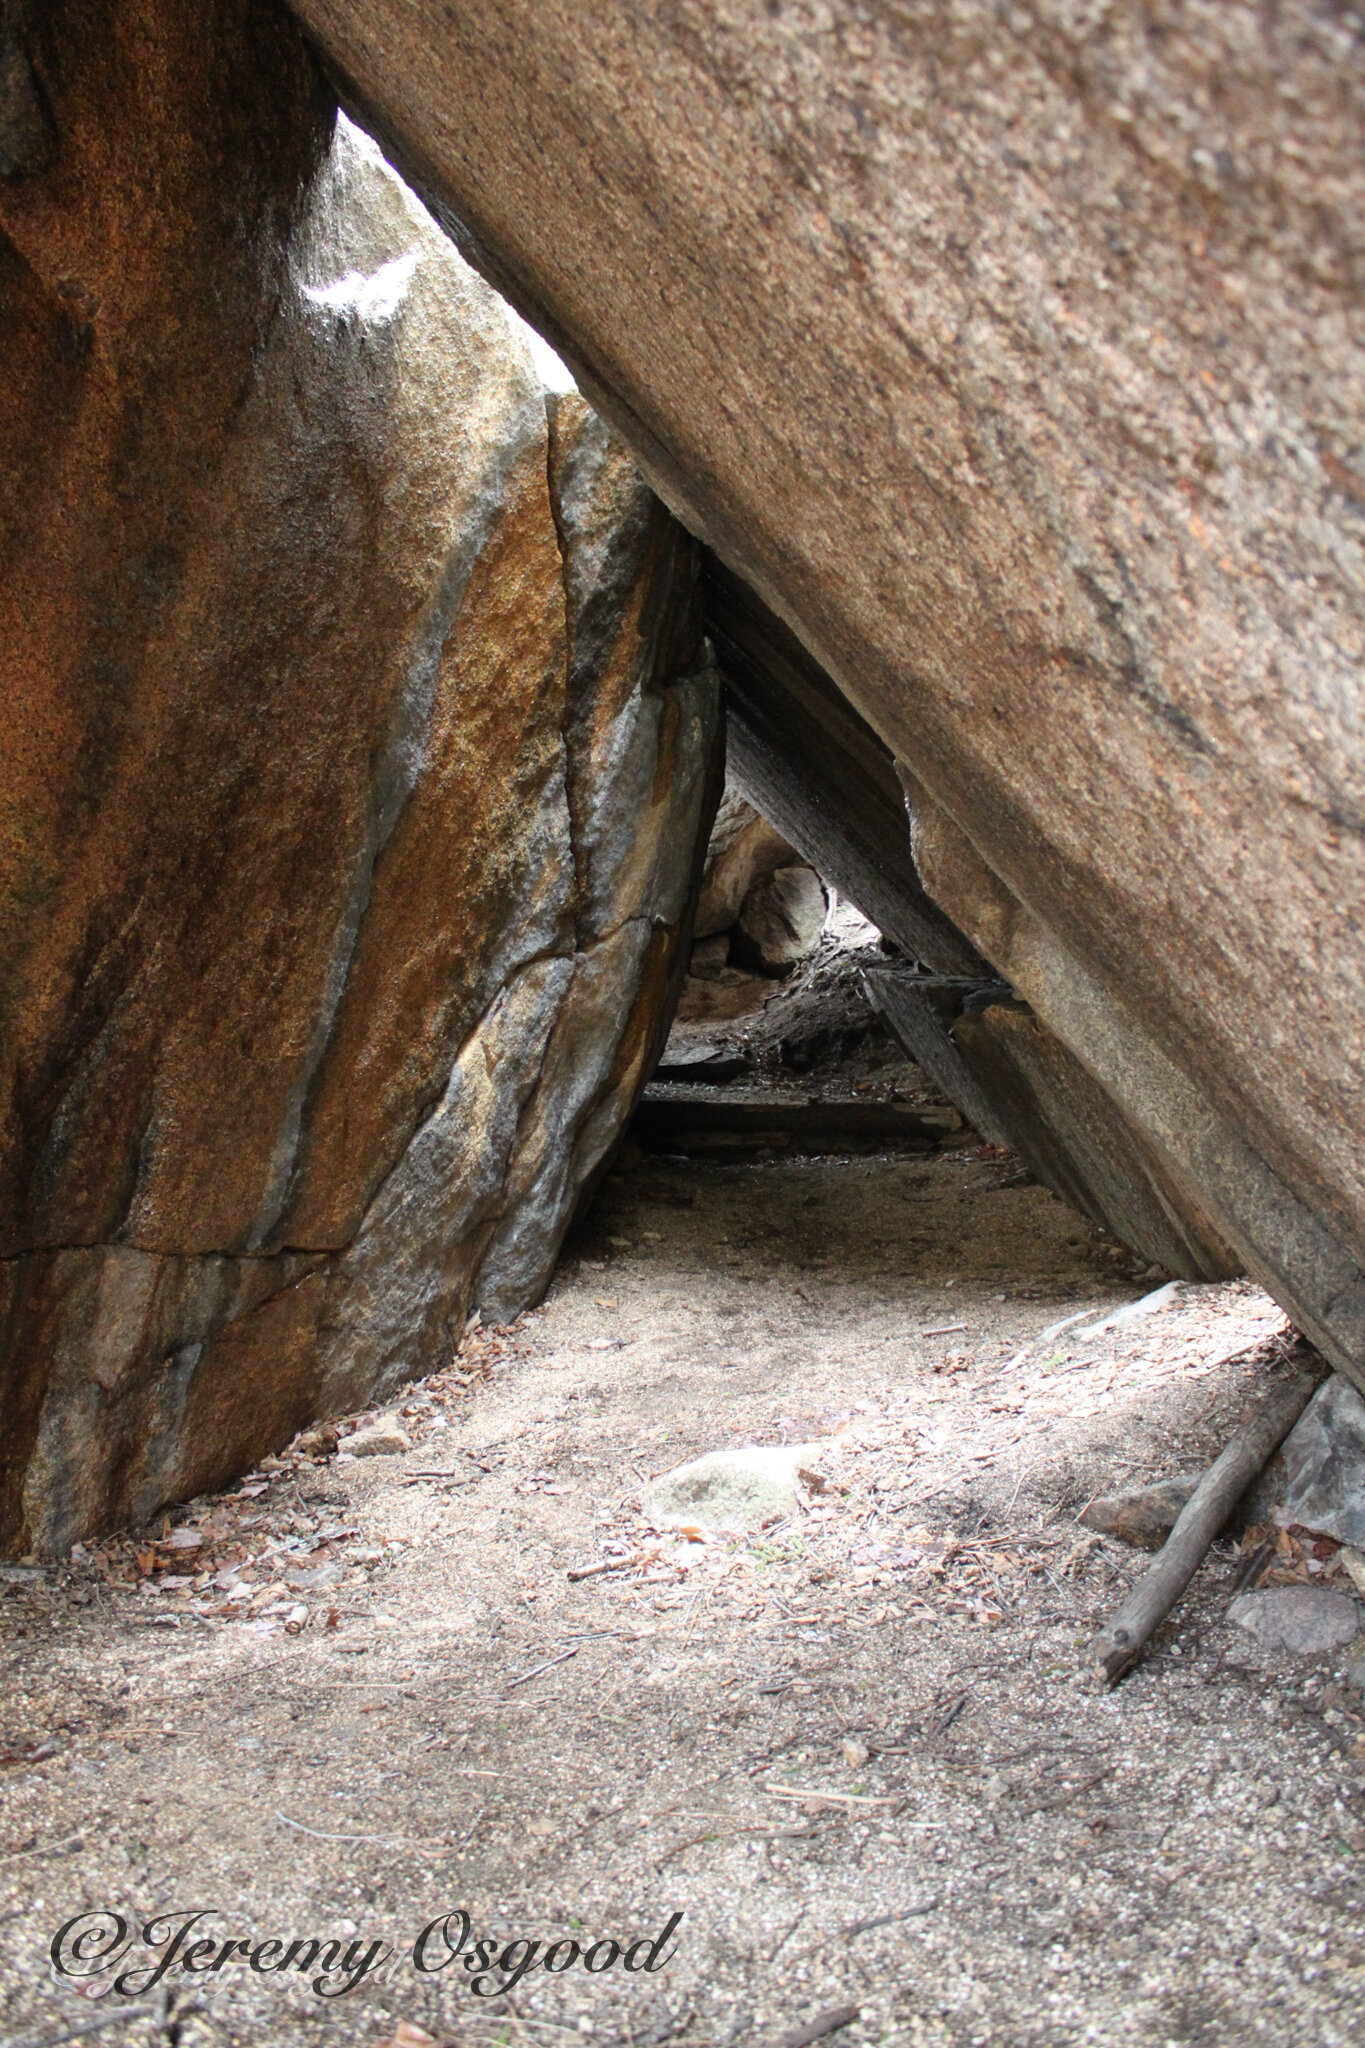 Big Rock Cave in the Sandwich Mountain Range. As Chocorua leaves to confront Atenah and the Mohawks at the Battle of Deer Run Ravine, his family retreats deep into the mountains and Big Rock Cave.